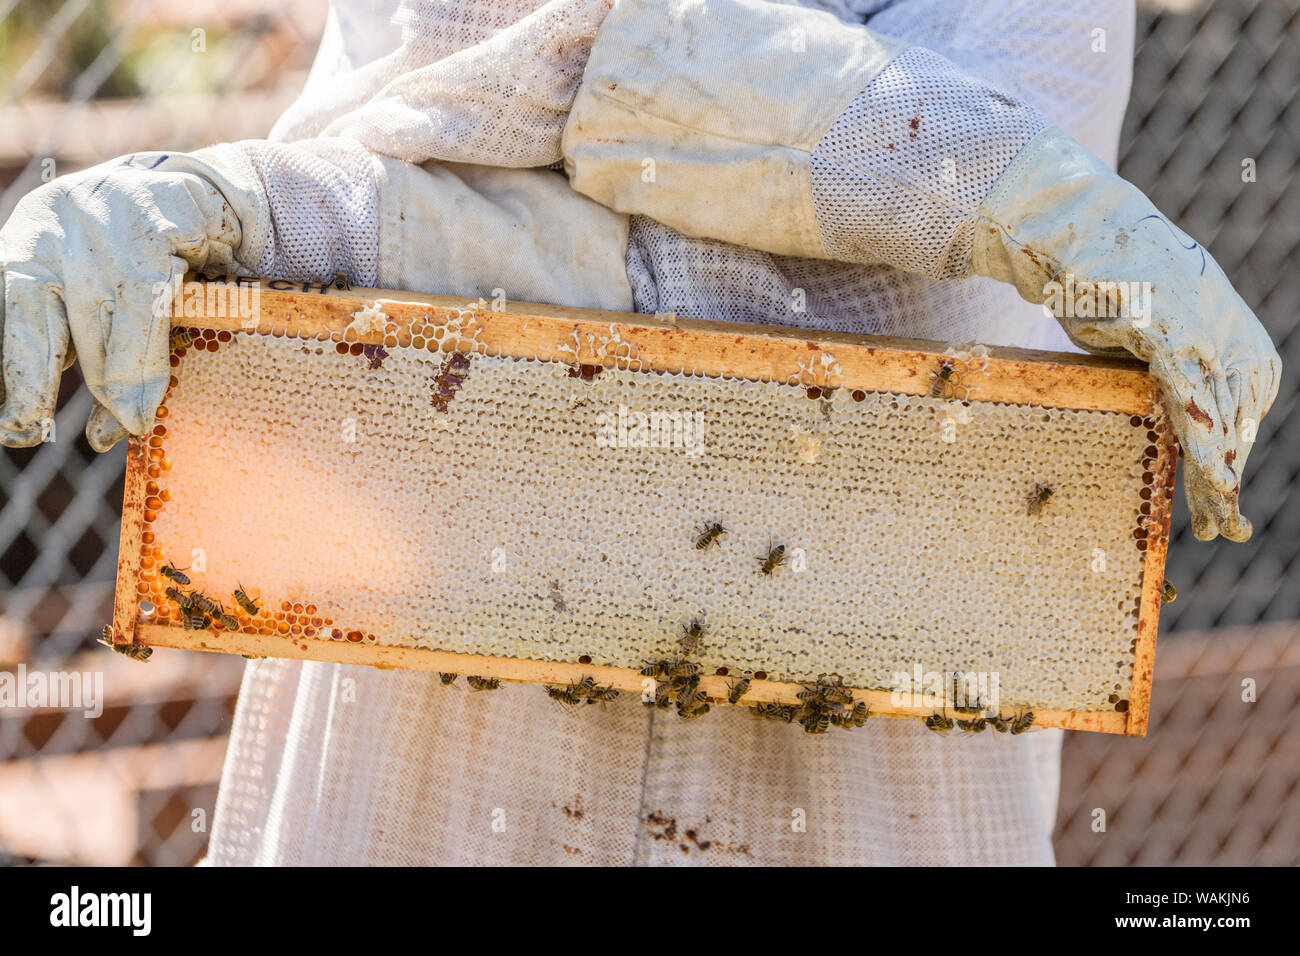 Maple Valley, Washington State, USA. Female beekeeper checking the health of the honey in a frame. This frame is capped with lovely white beeswax and ready for harvesting. Stock Photo